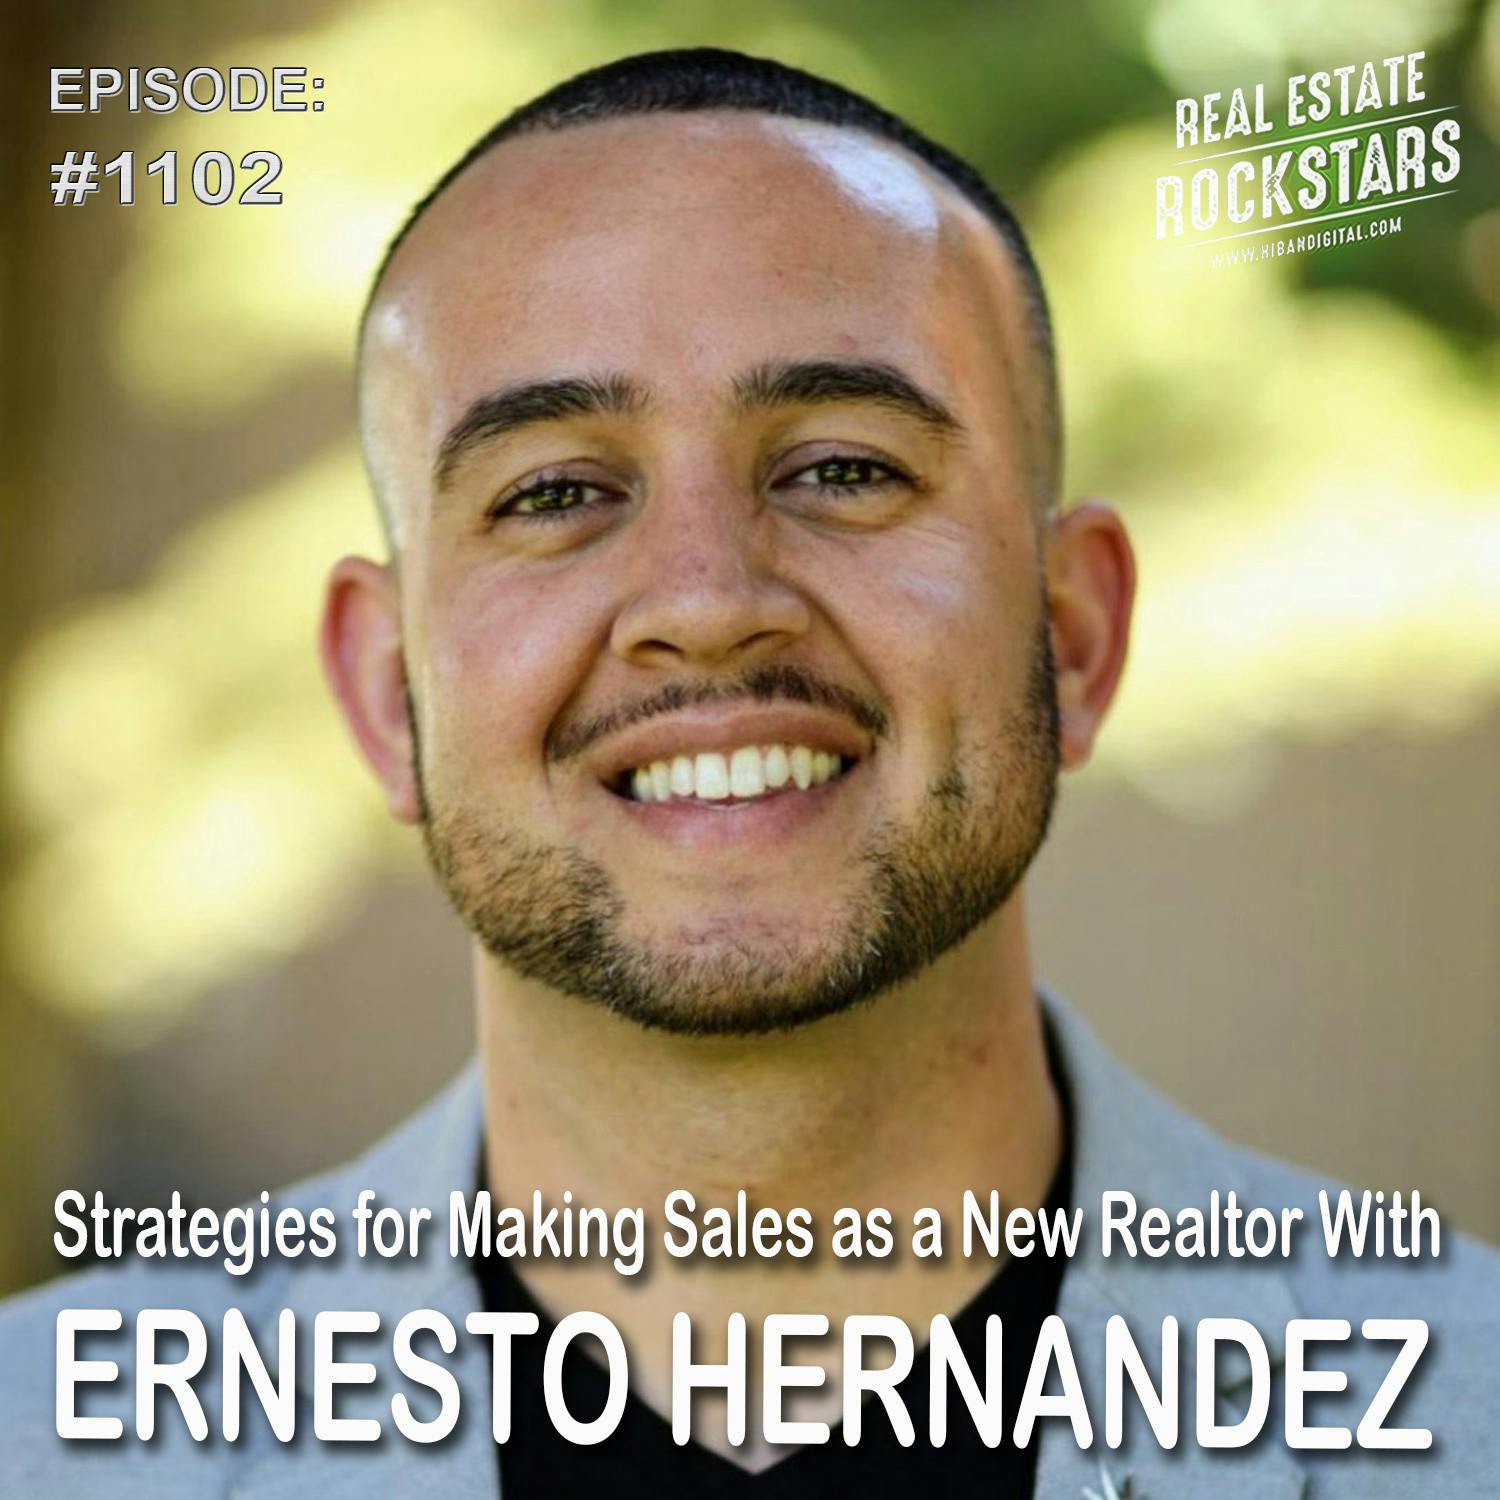 1102: Strategies for Making Sales as a New Realtor With Ernesto Hernandez